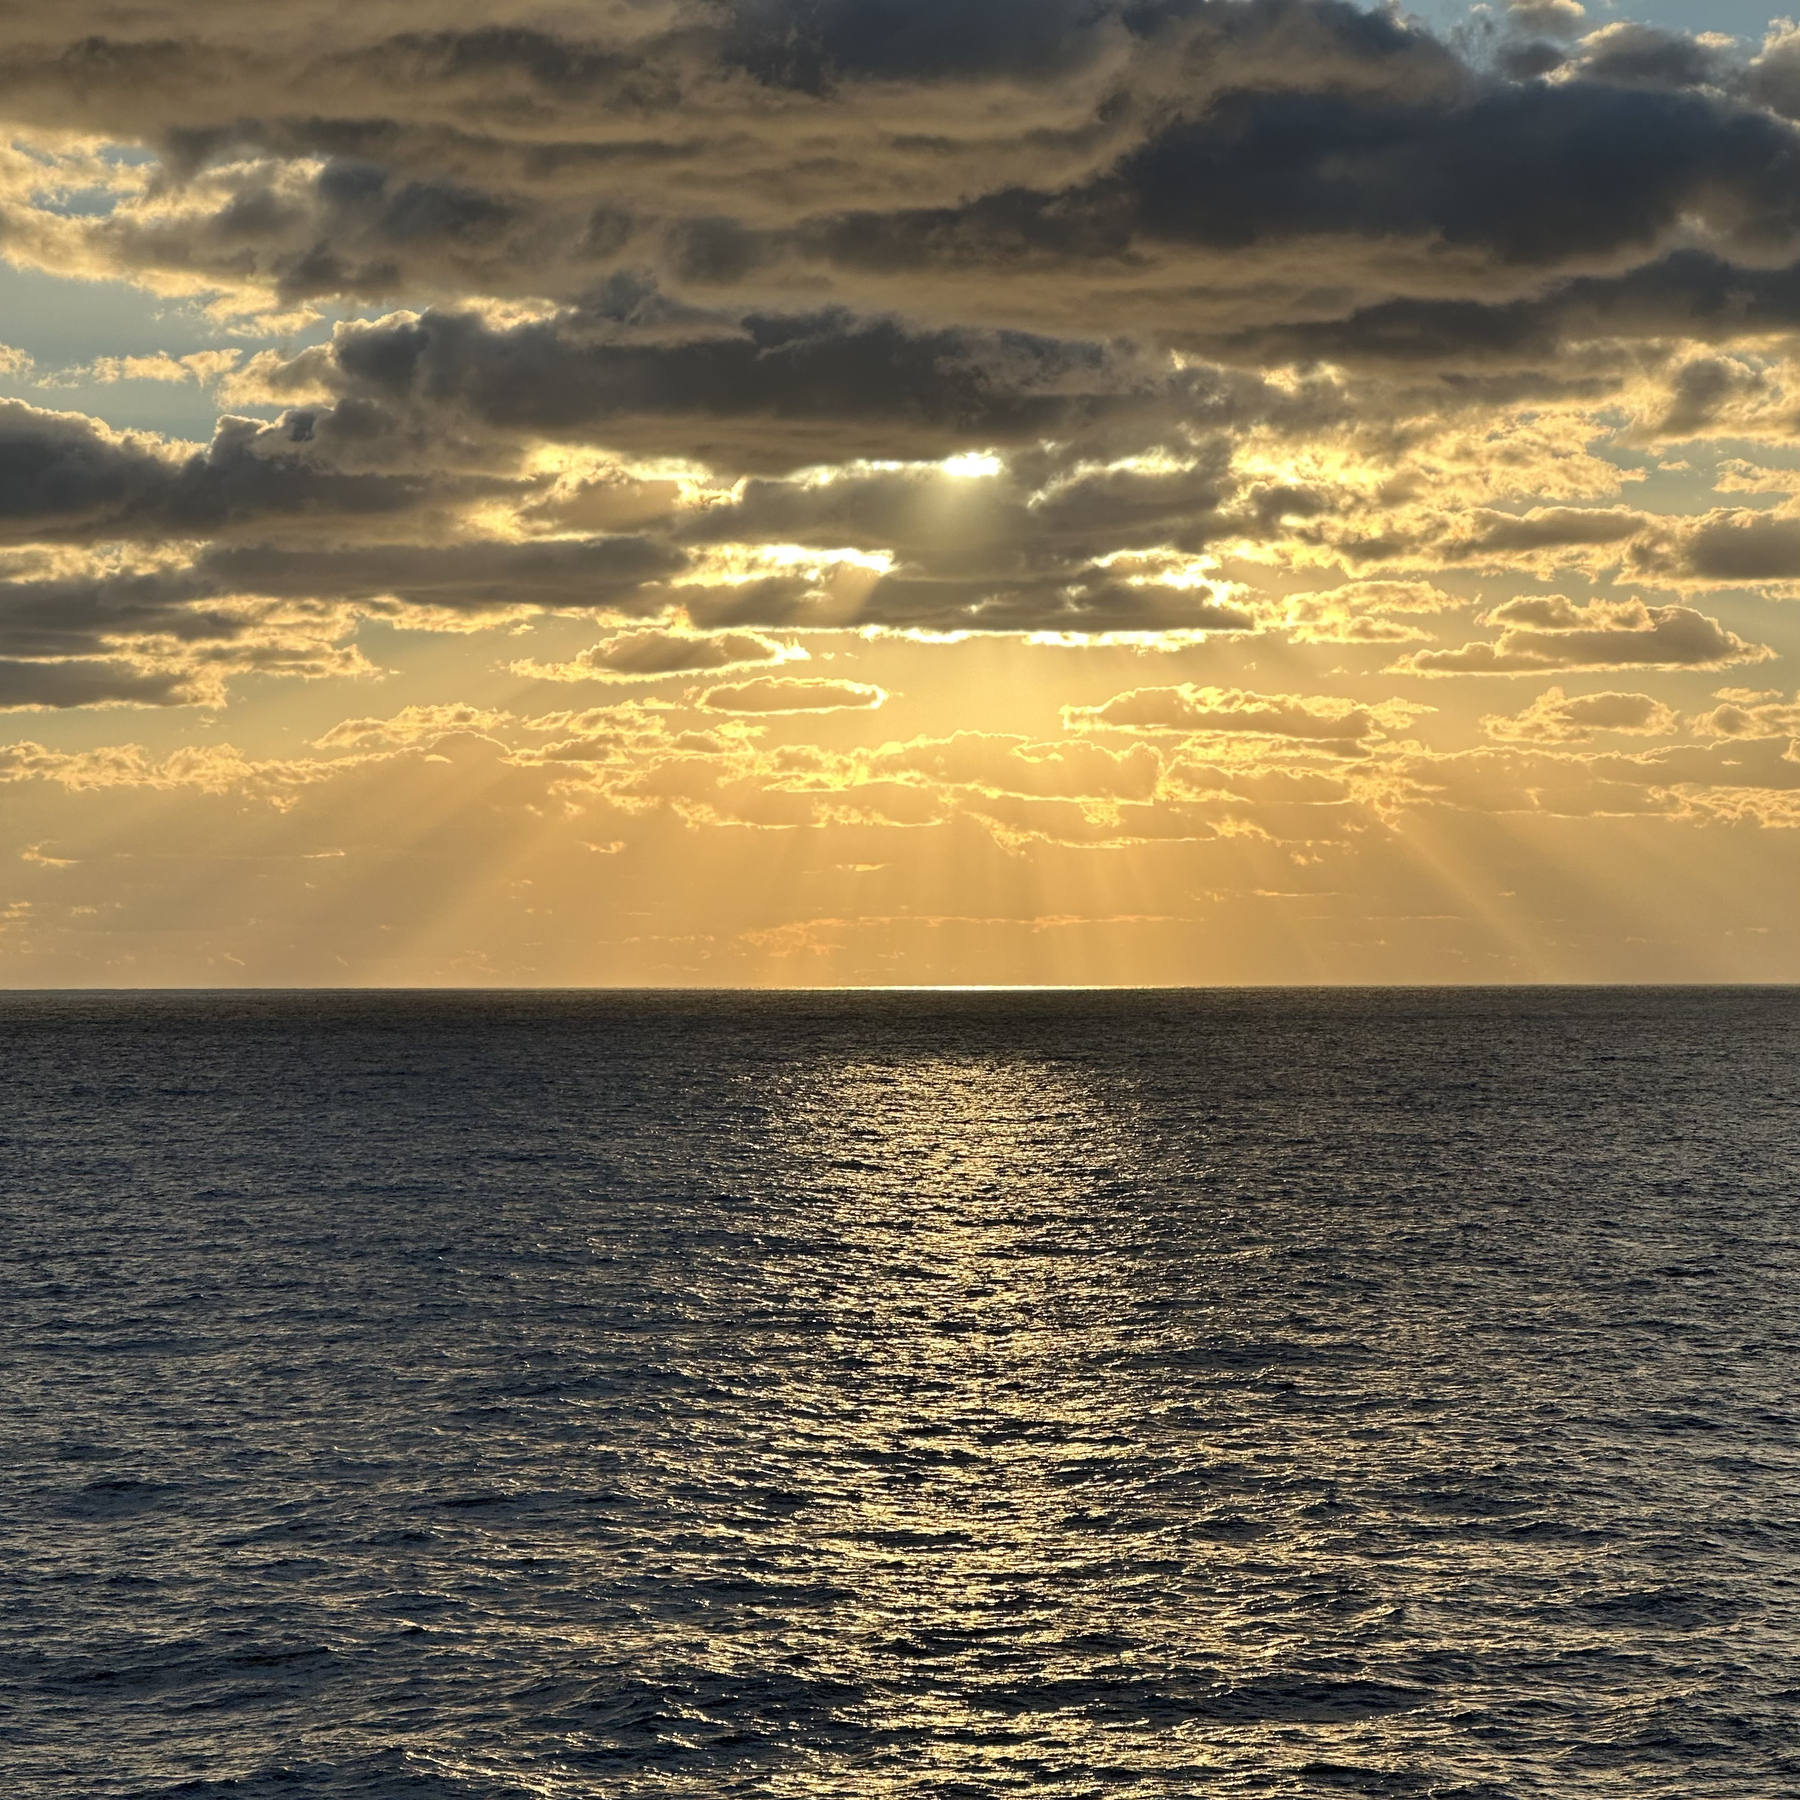 Photo of the sunrise from our cruise ship balcony